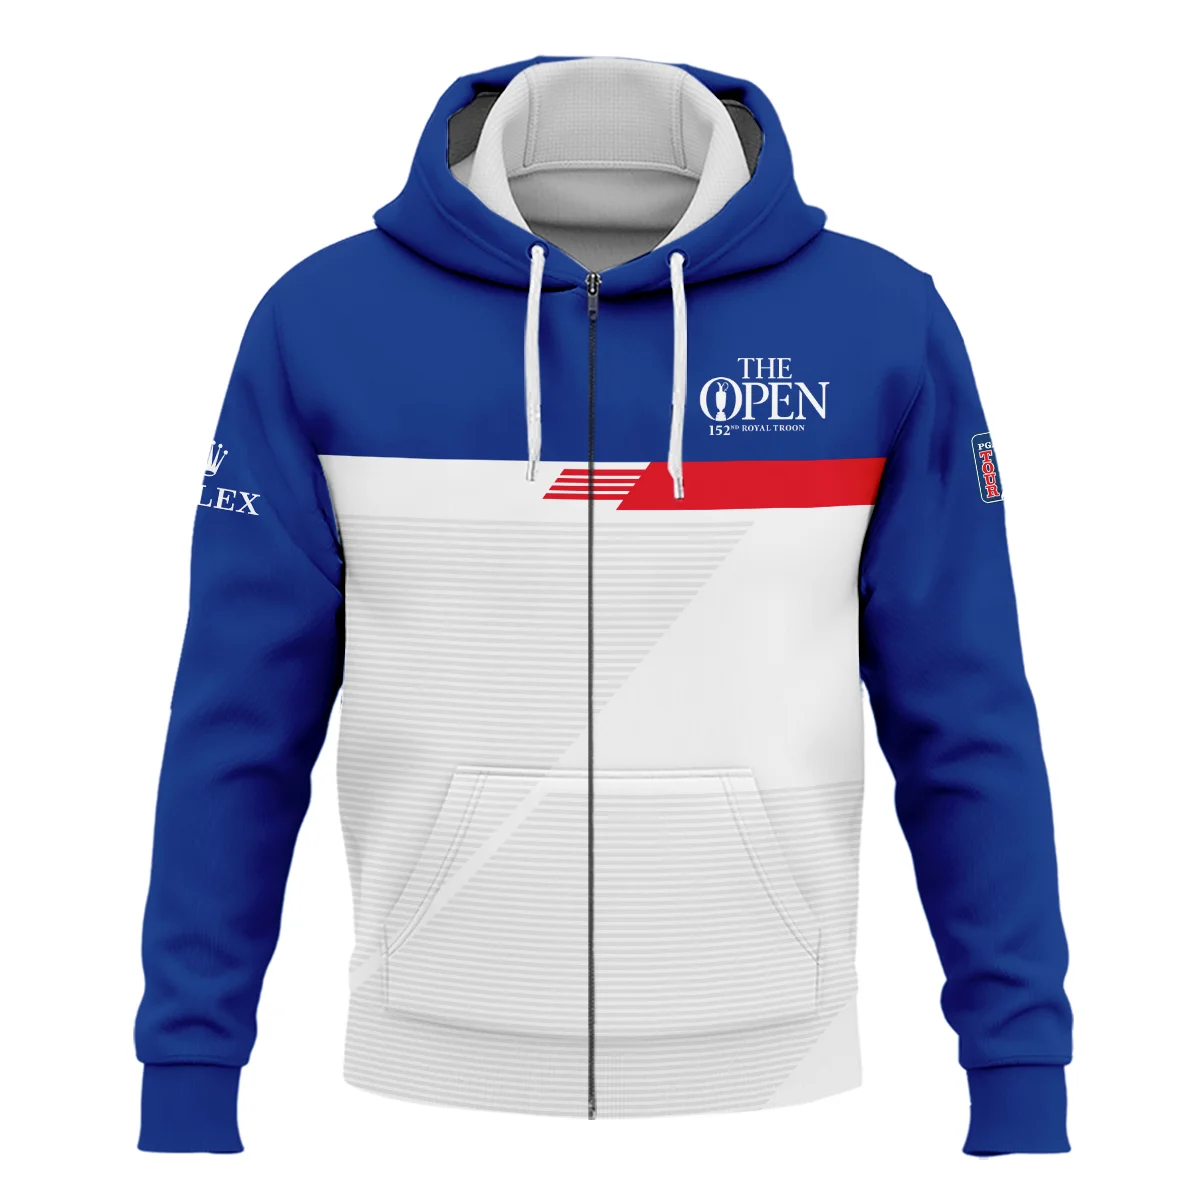 152nd Open Championship Golf Blue Red White Line Pattern Background Rolex Sleeveless Jacket All Over Prints HOTOP260624A01ROXSJK